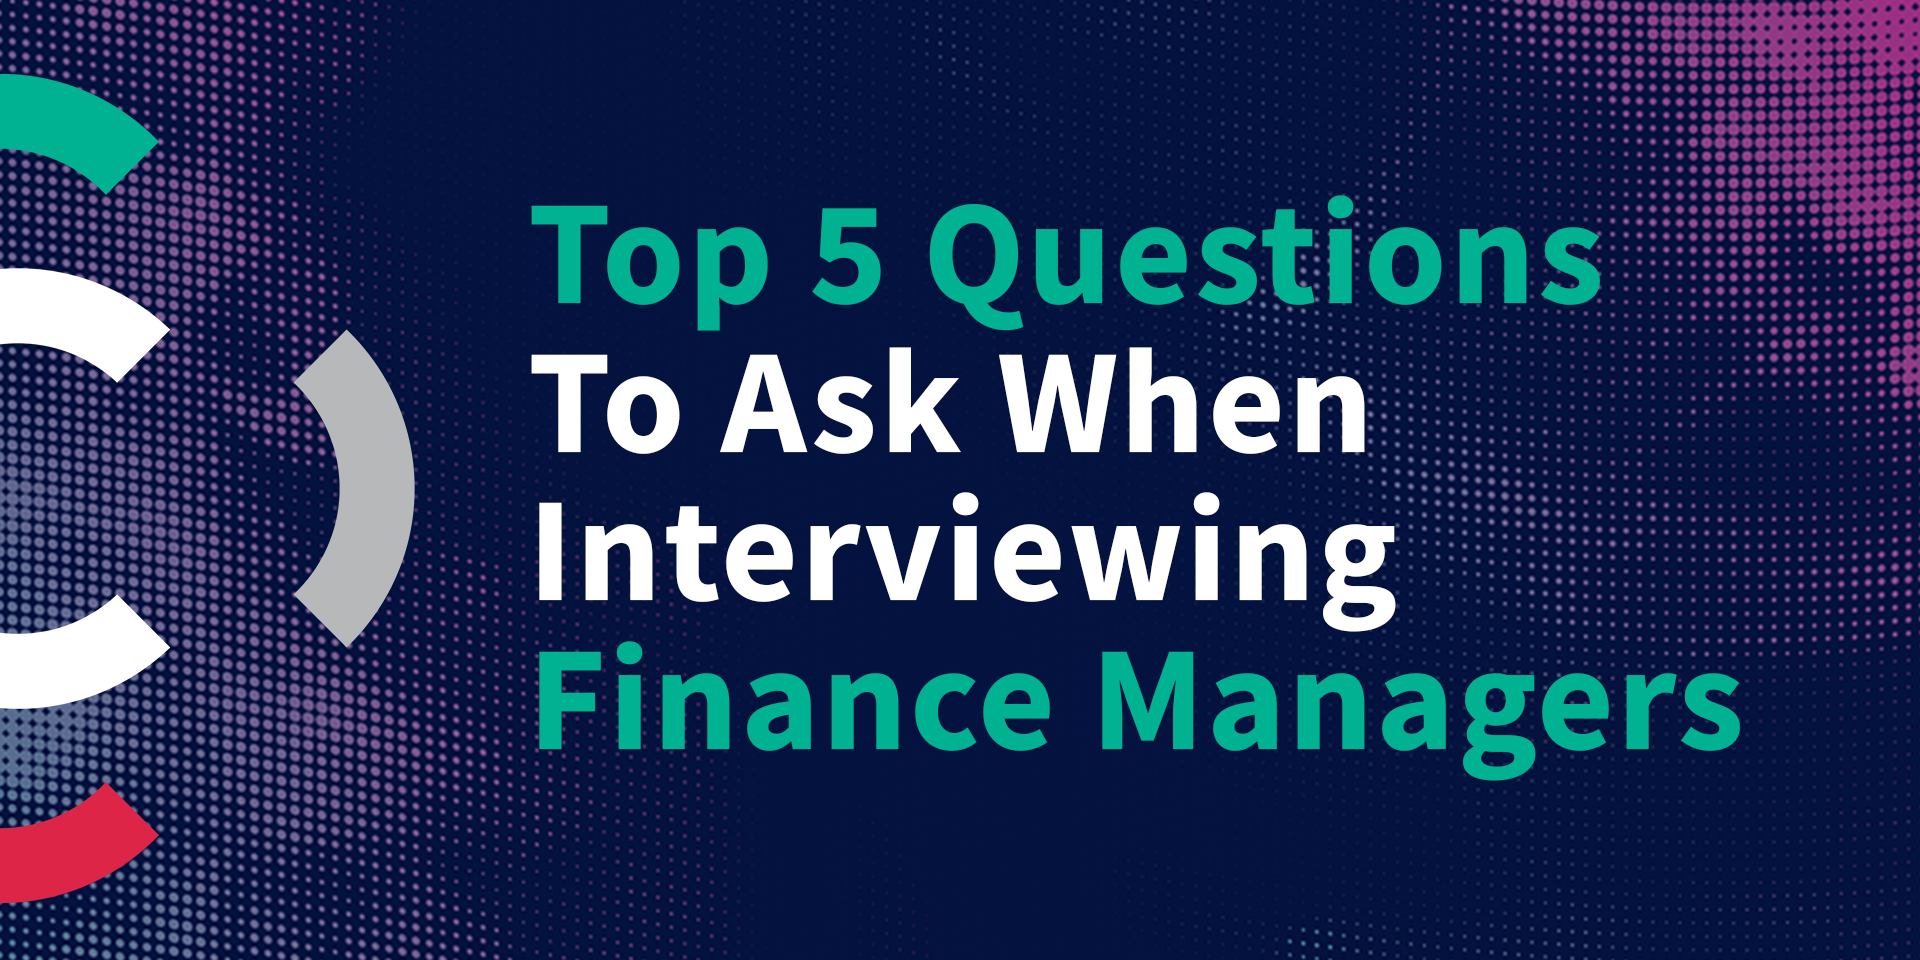 Top 5 Questions To Ask Finance Managers